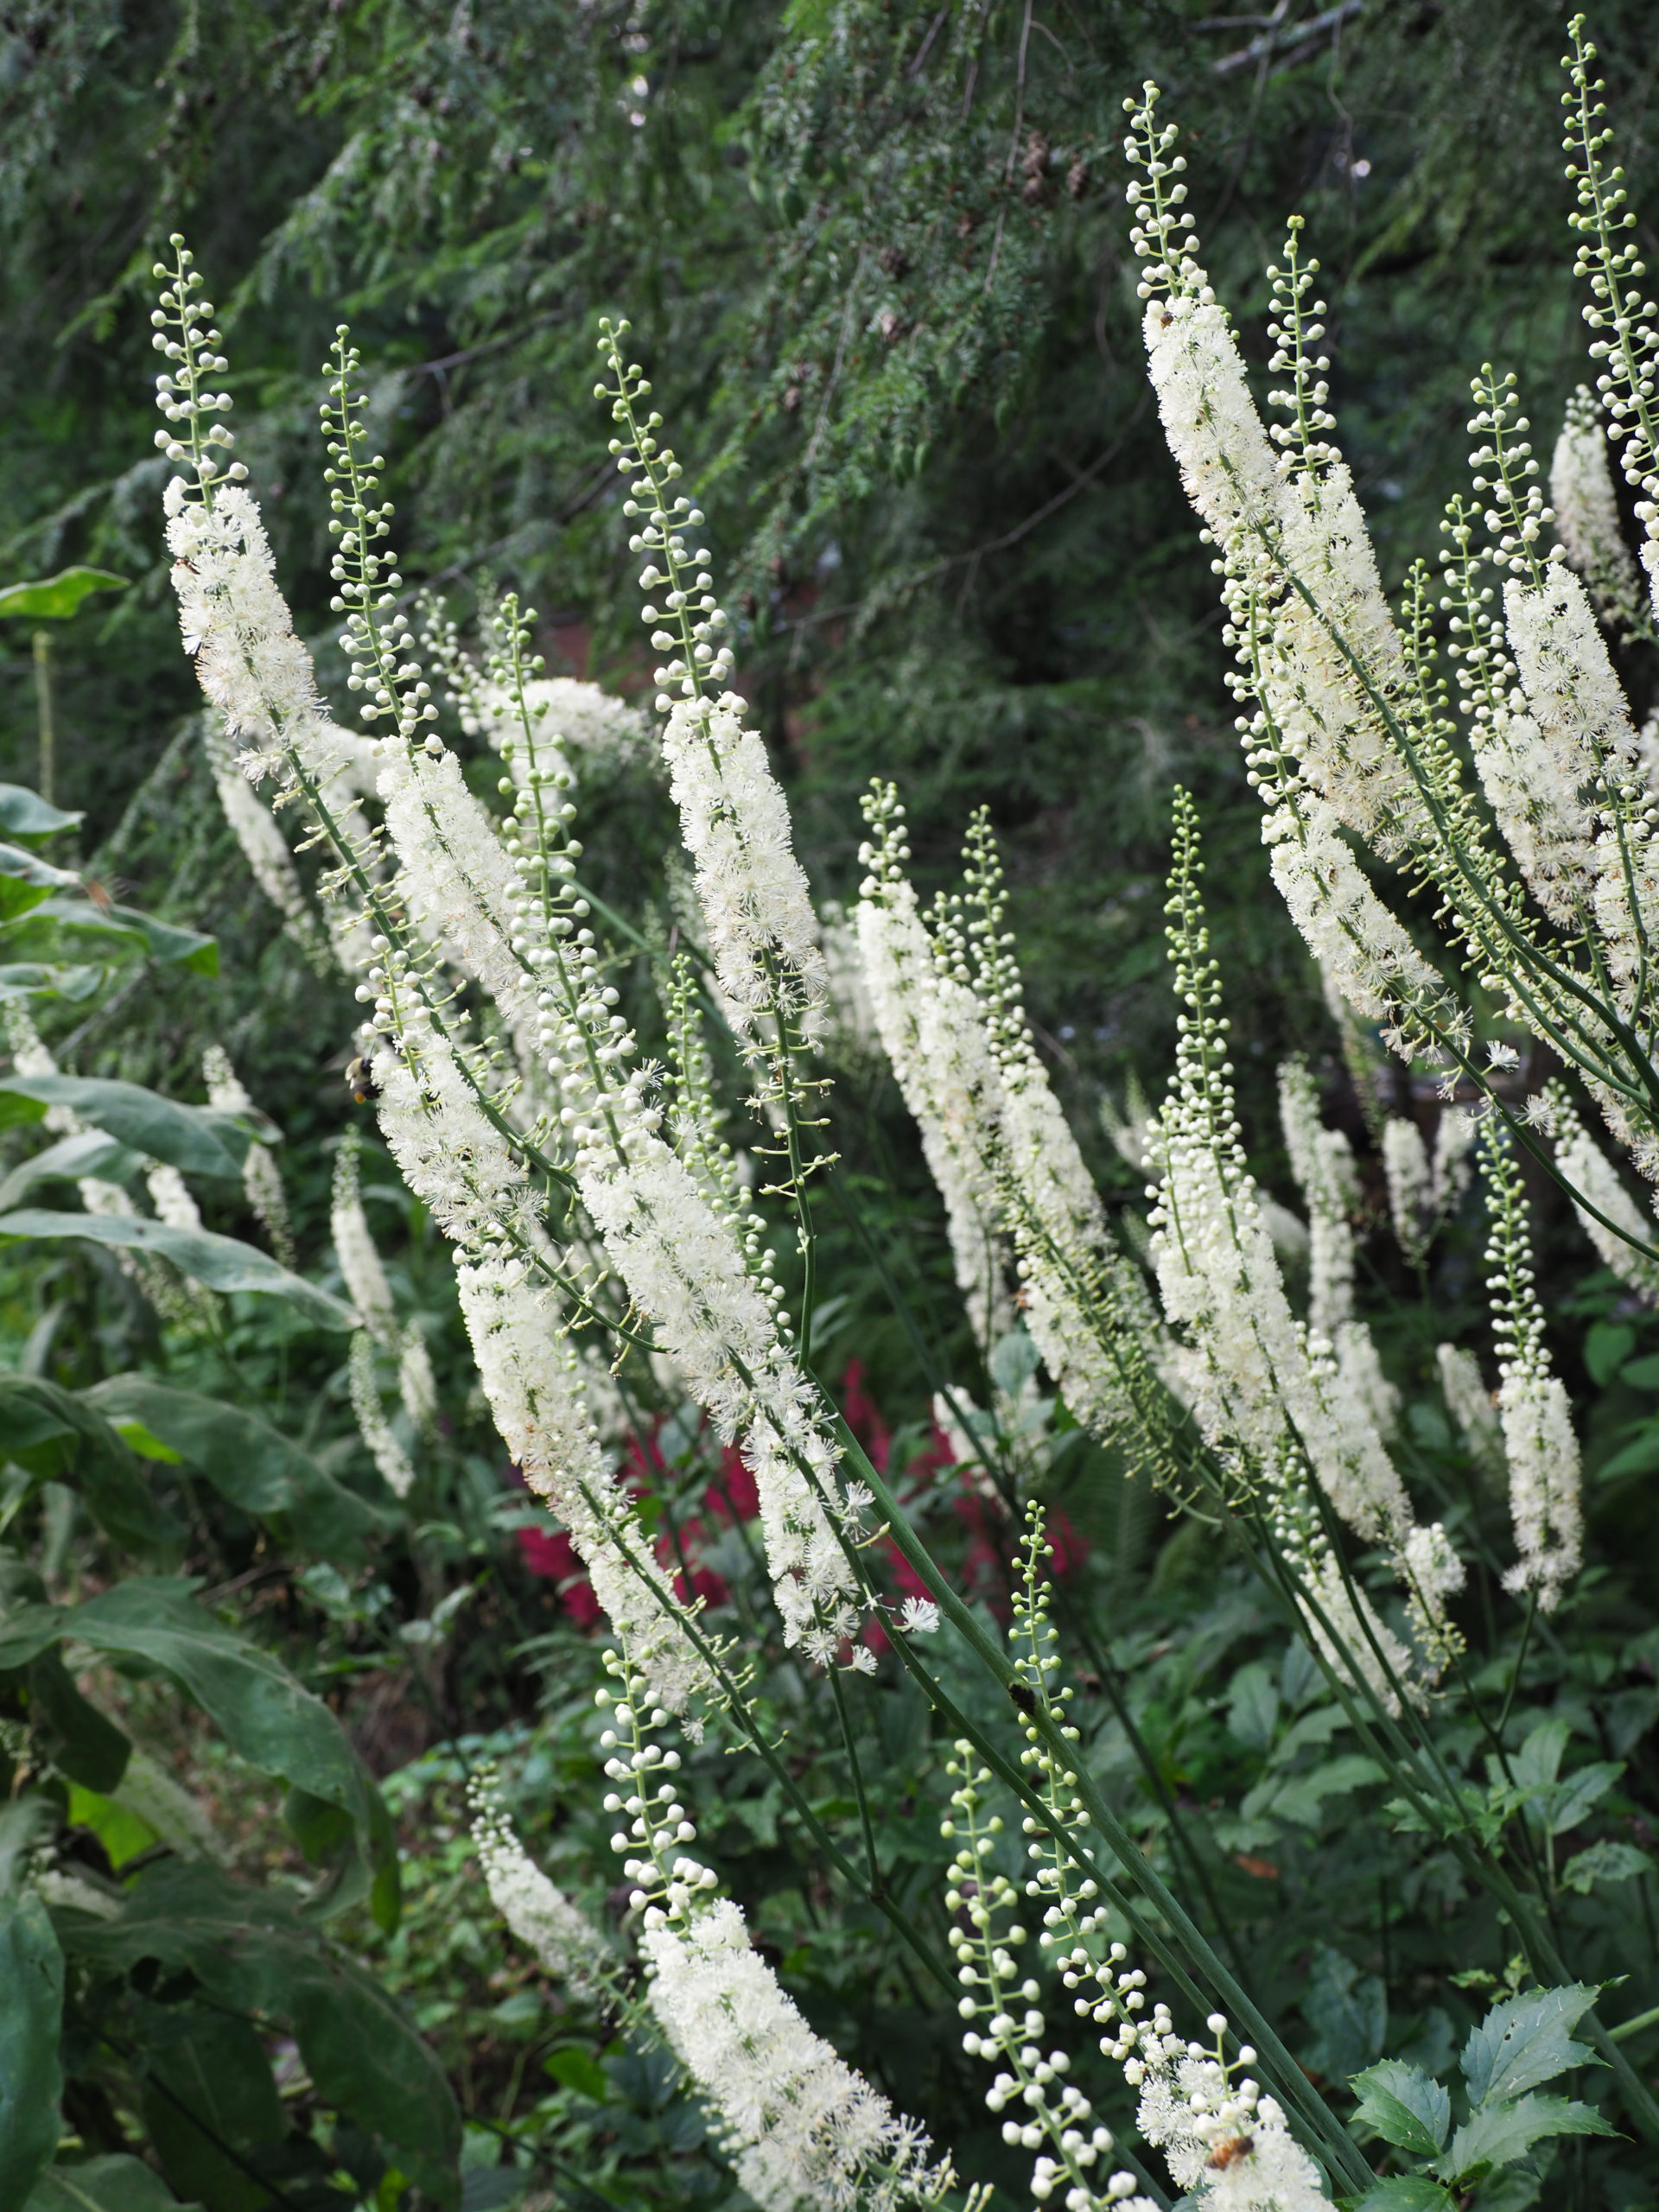 The native Actaea simplex, or bugbane, grows in shaded woods to about 6 feet tall. In spite of its common name, it attracts honeybees like a magnet in early summer.